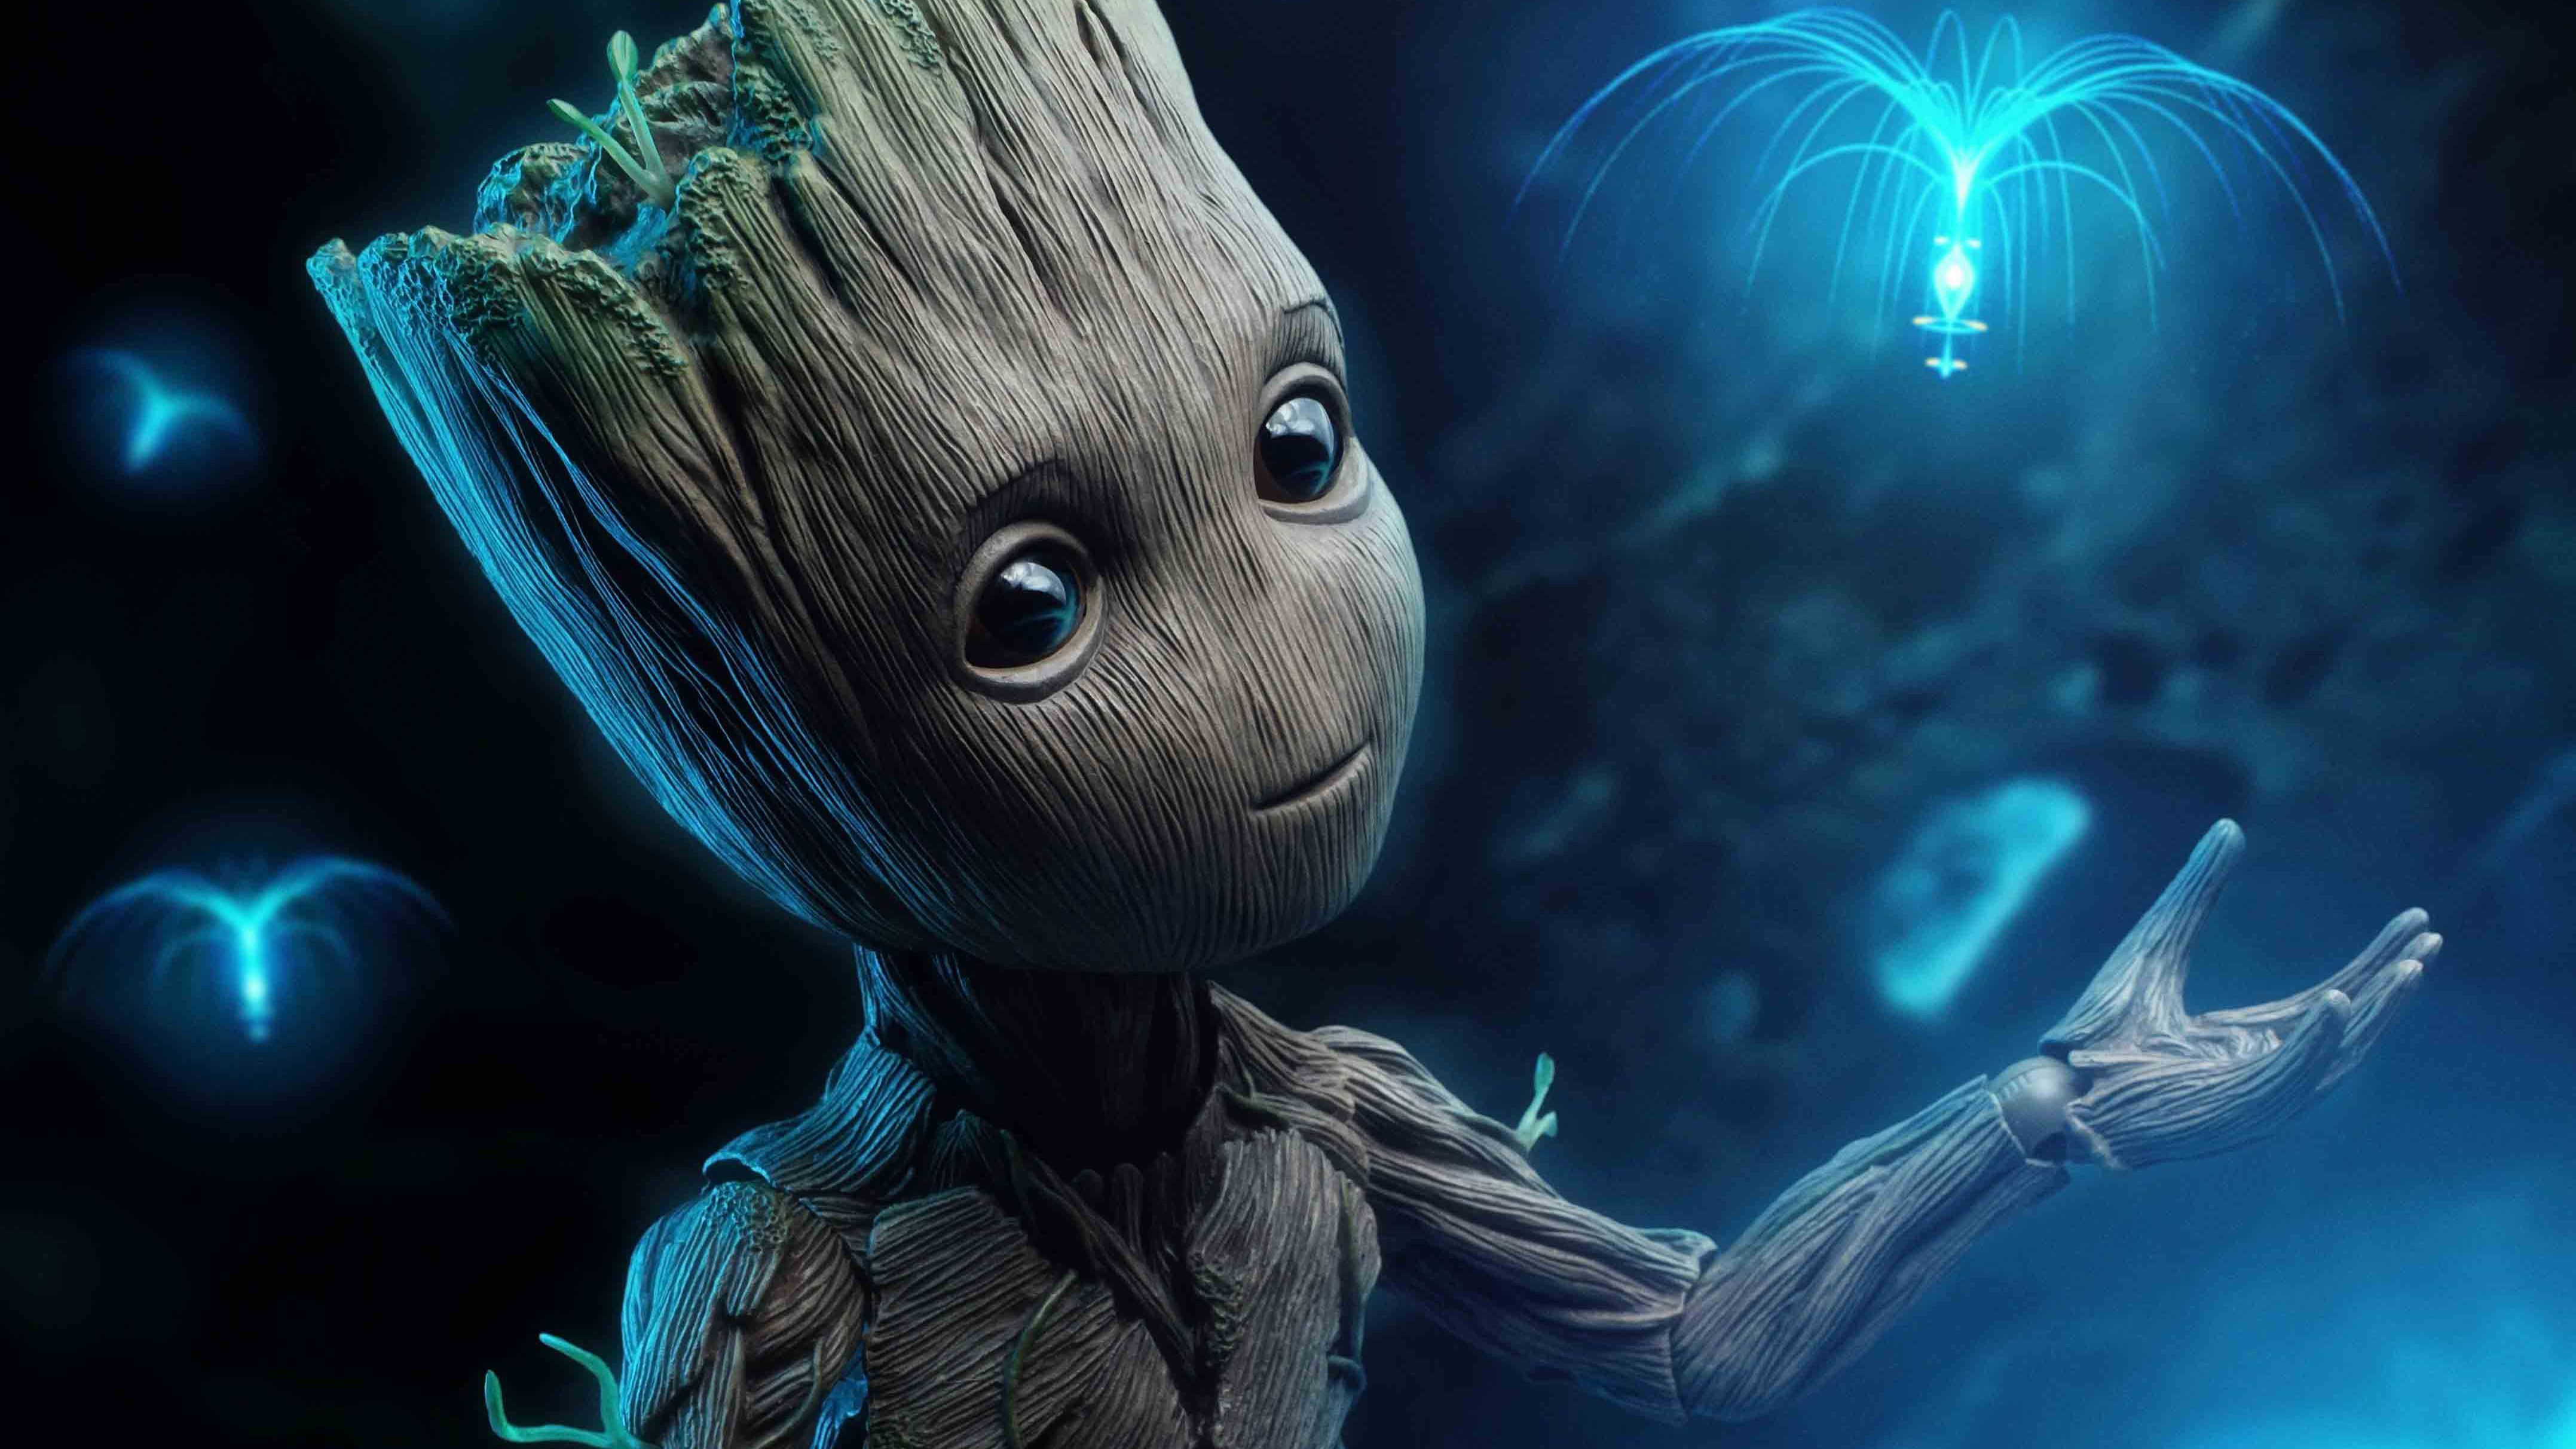 4k Wallpaper Baby Groot Hd Wallpaper 4k | Images and Photos finder